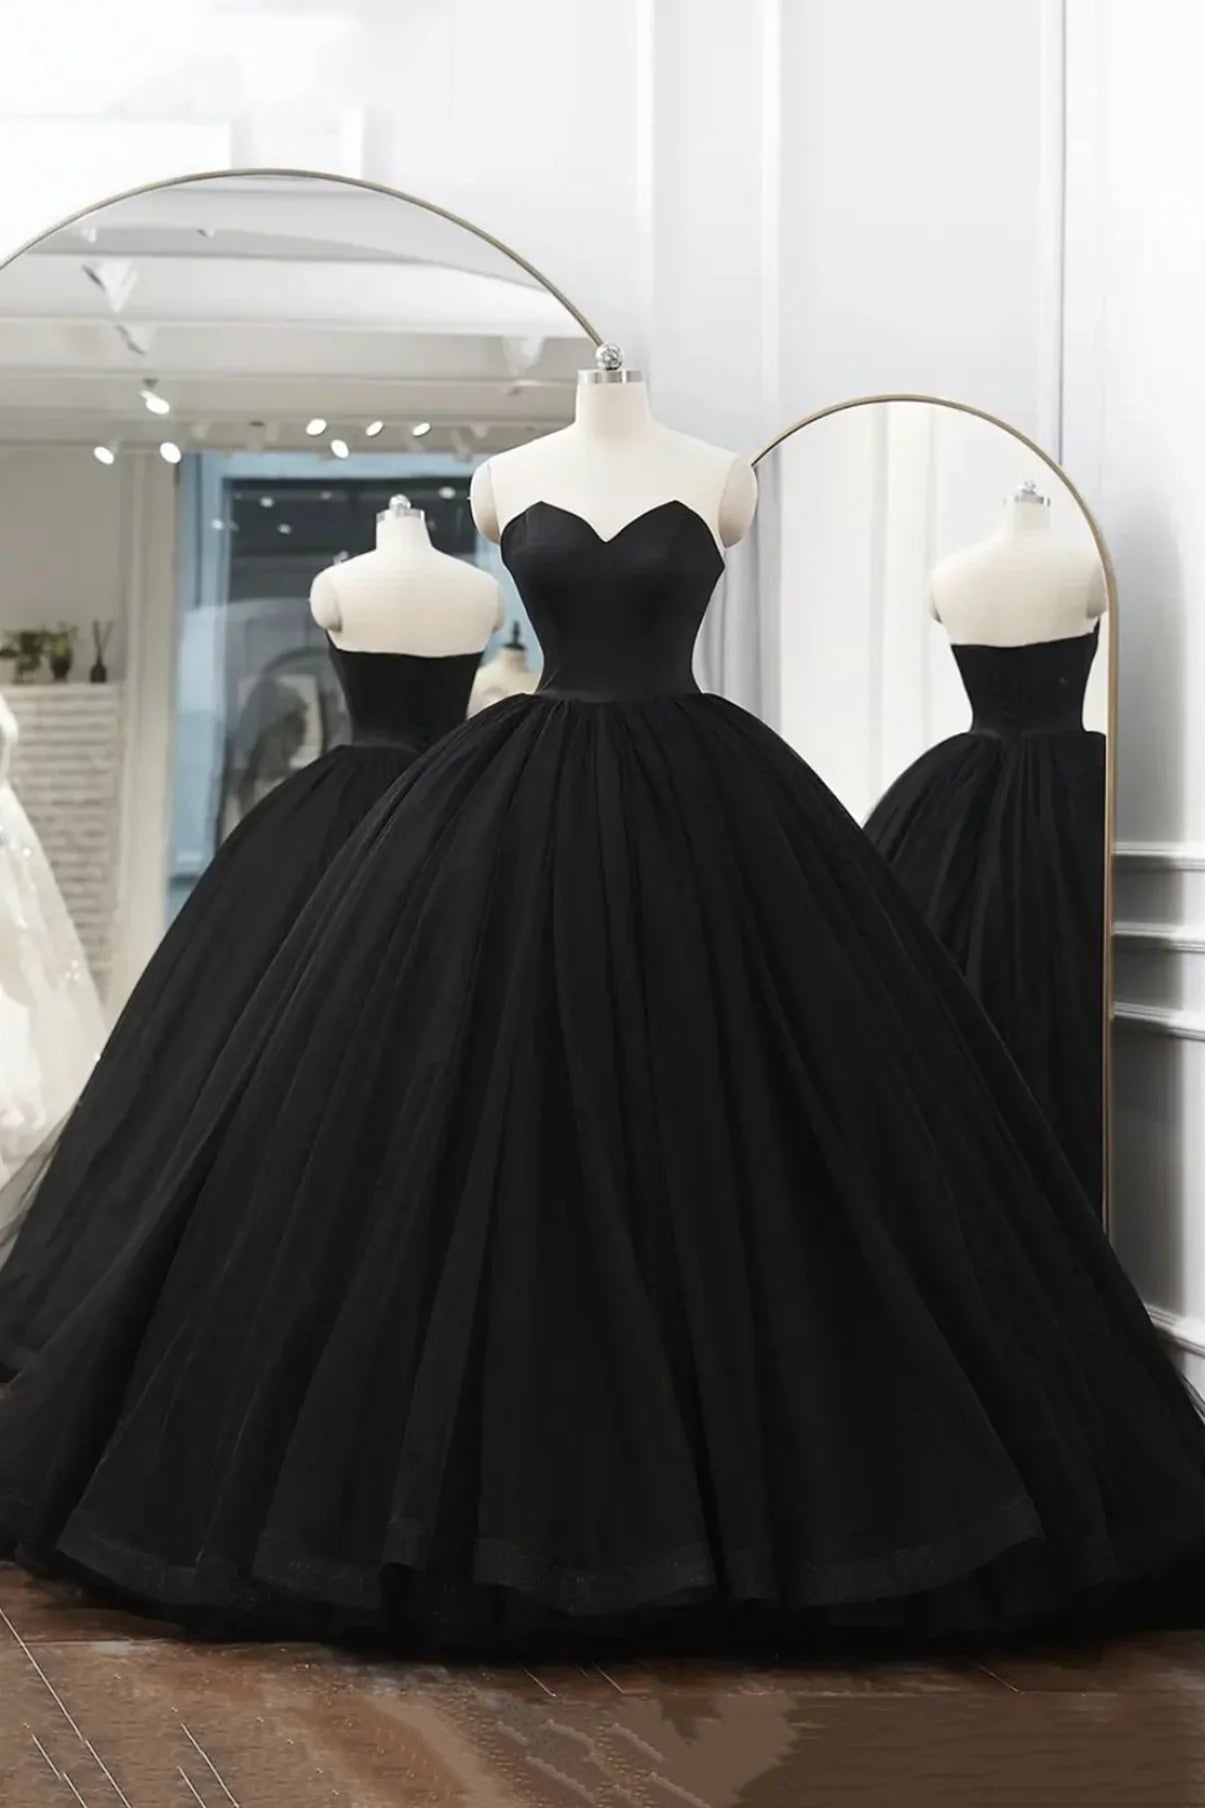 Black Tulle Long Corset Ball Gown Corset Prom Dresses,Vintage Long Evening Dress outfit, Party Dress 2036